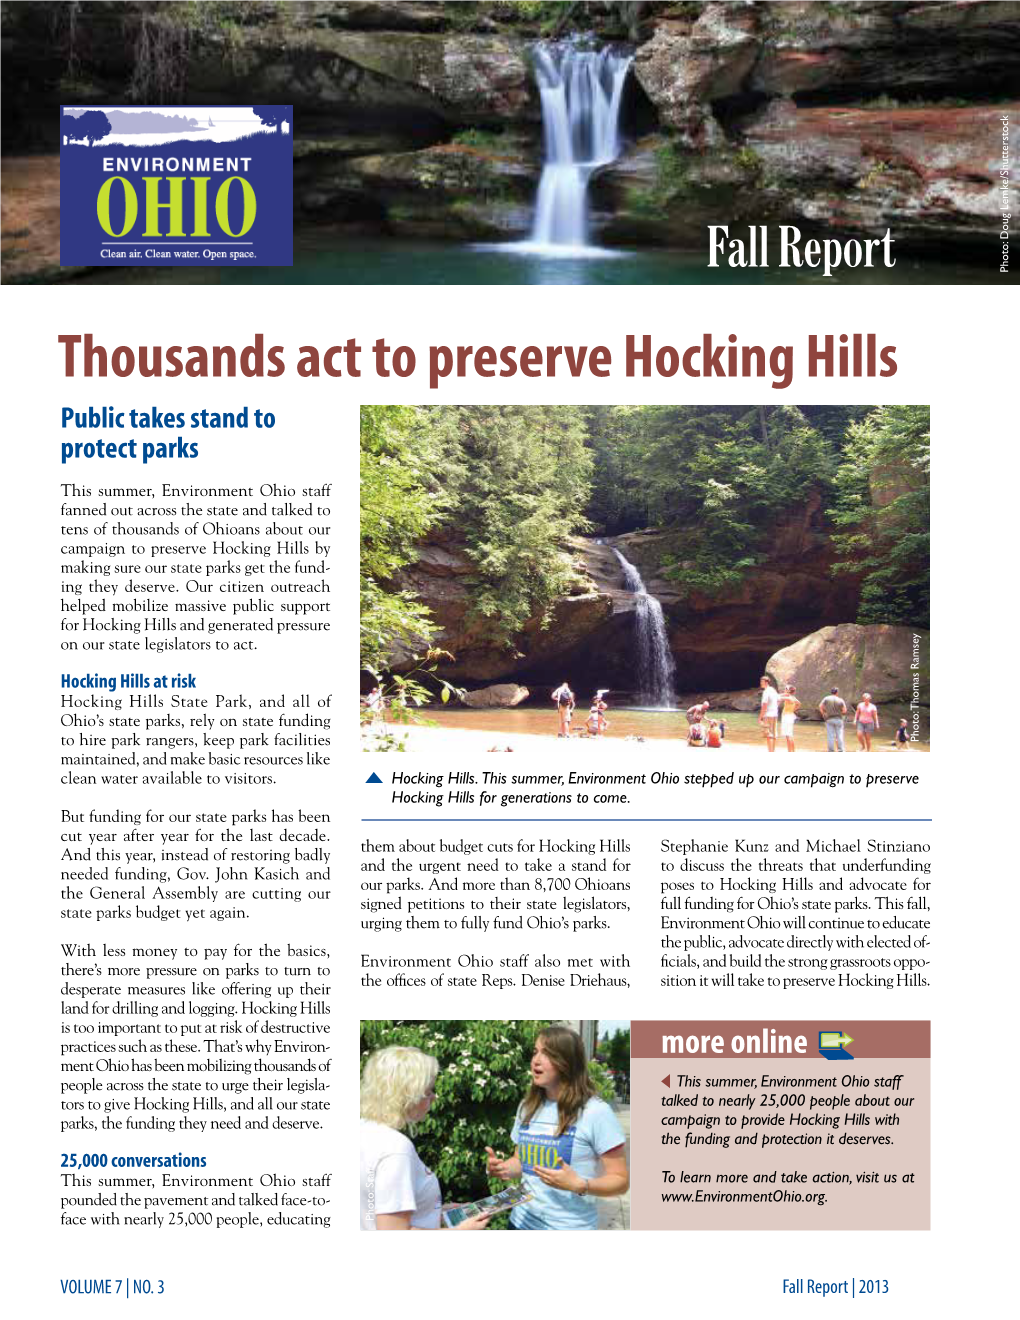 Thousands Act to Preserve Hocking Hills Public Takes Stand to Protect Parks